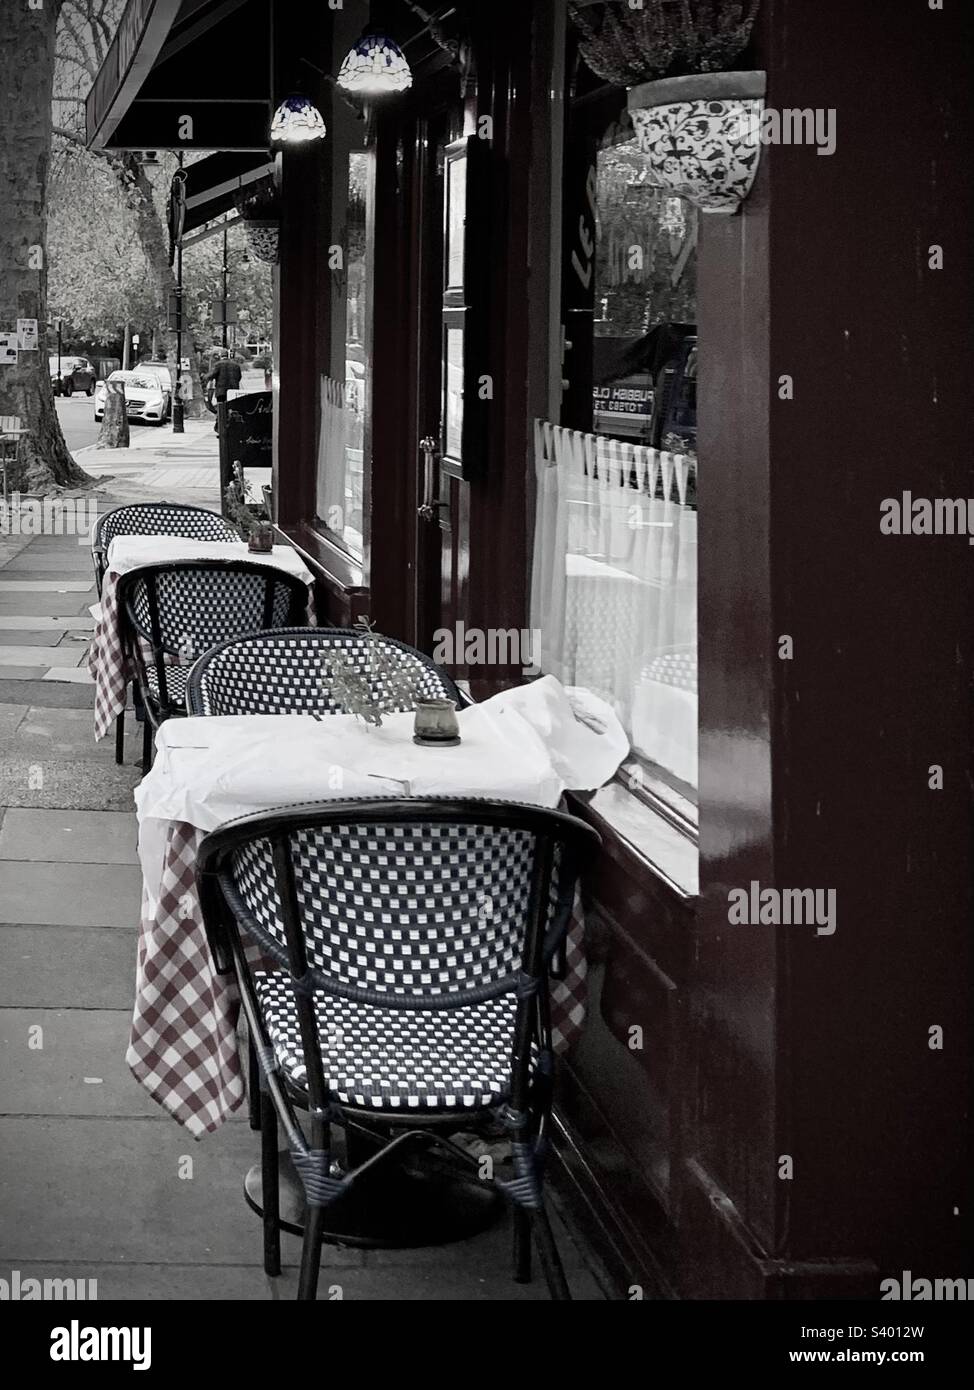 An Italian restaurant cafe with tables outside on the pavement. Checkered table cloths and wicker chairs Stock Photo